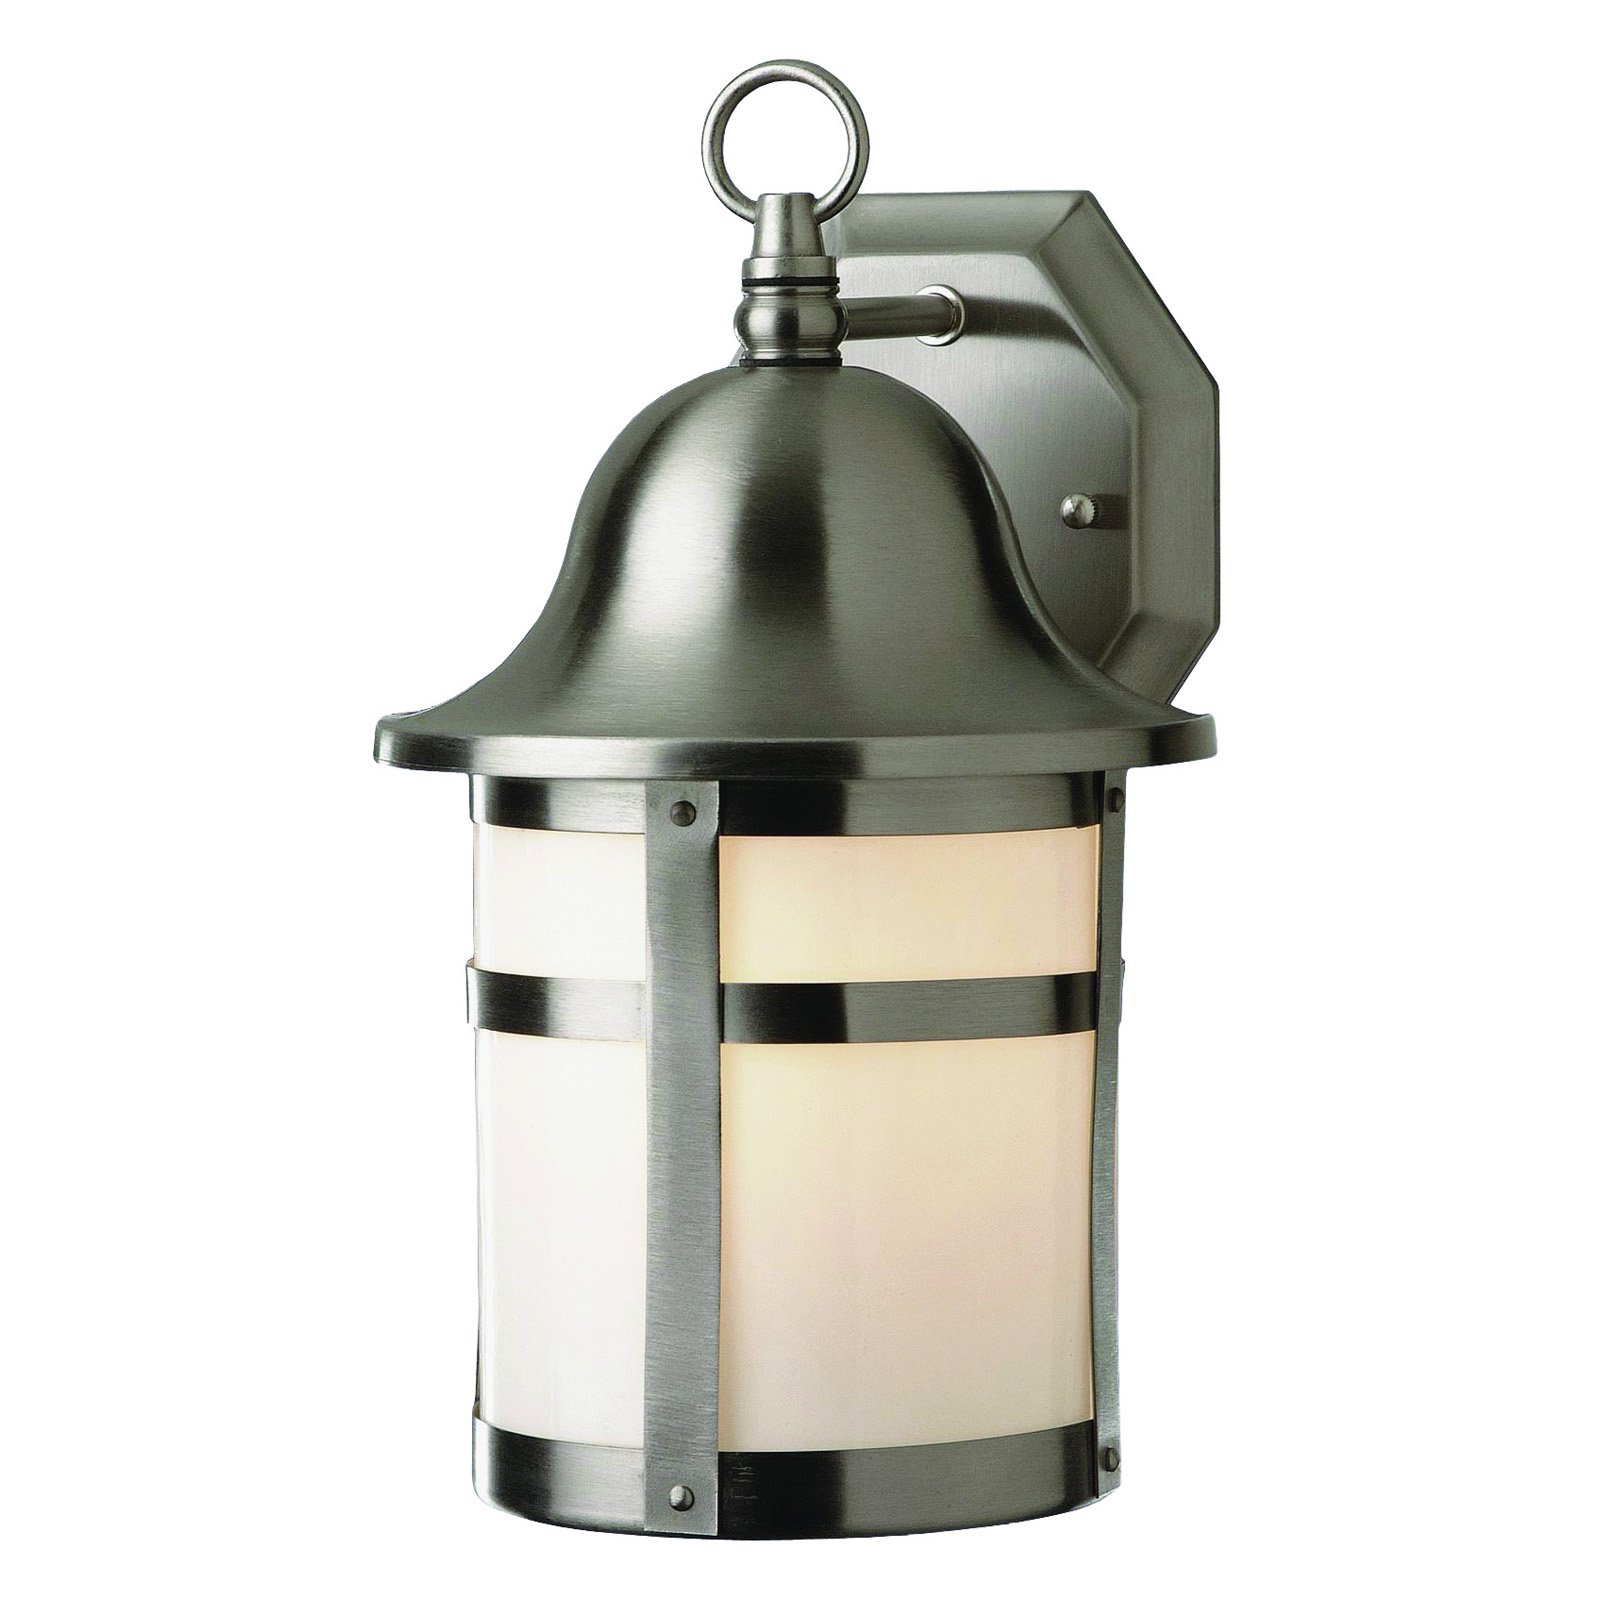 Bel Air Lighting Thomas Weathered Bronze Brown Switch Incandescent Wall Lantern - image 2 of 2